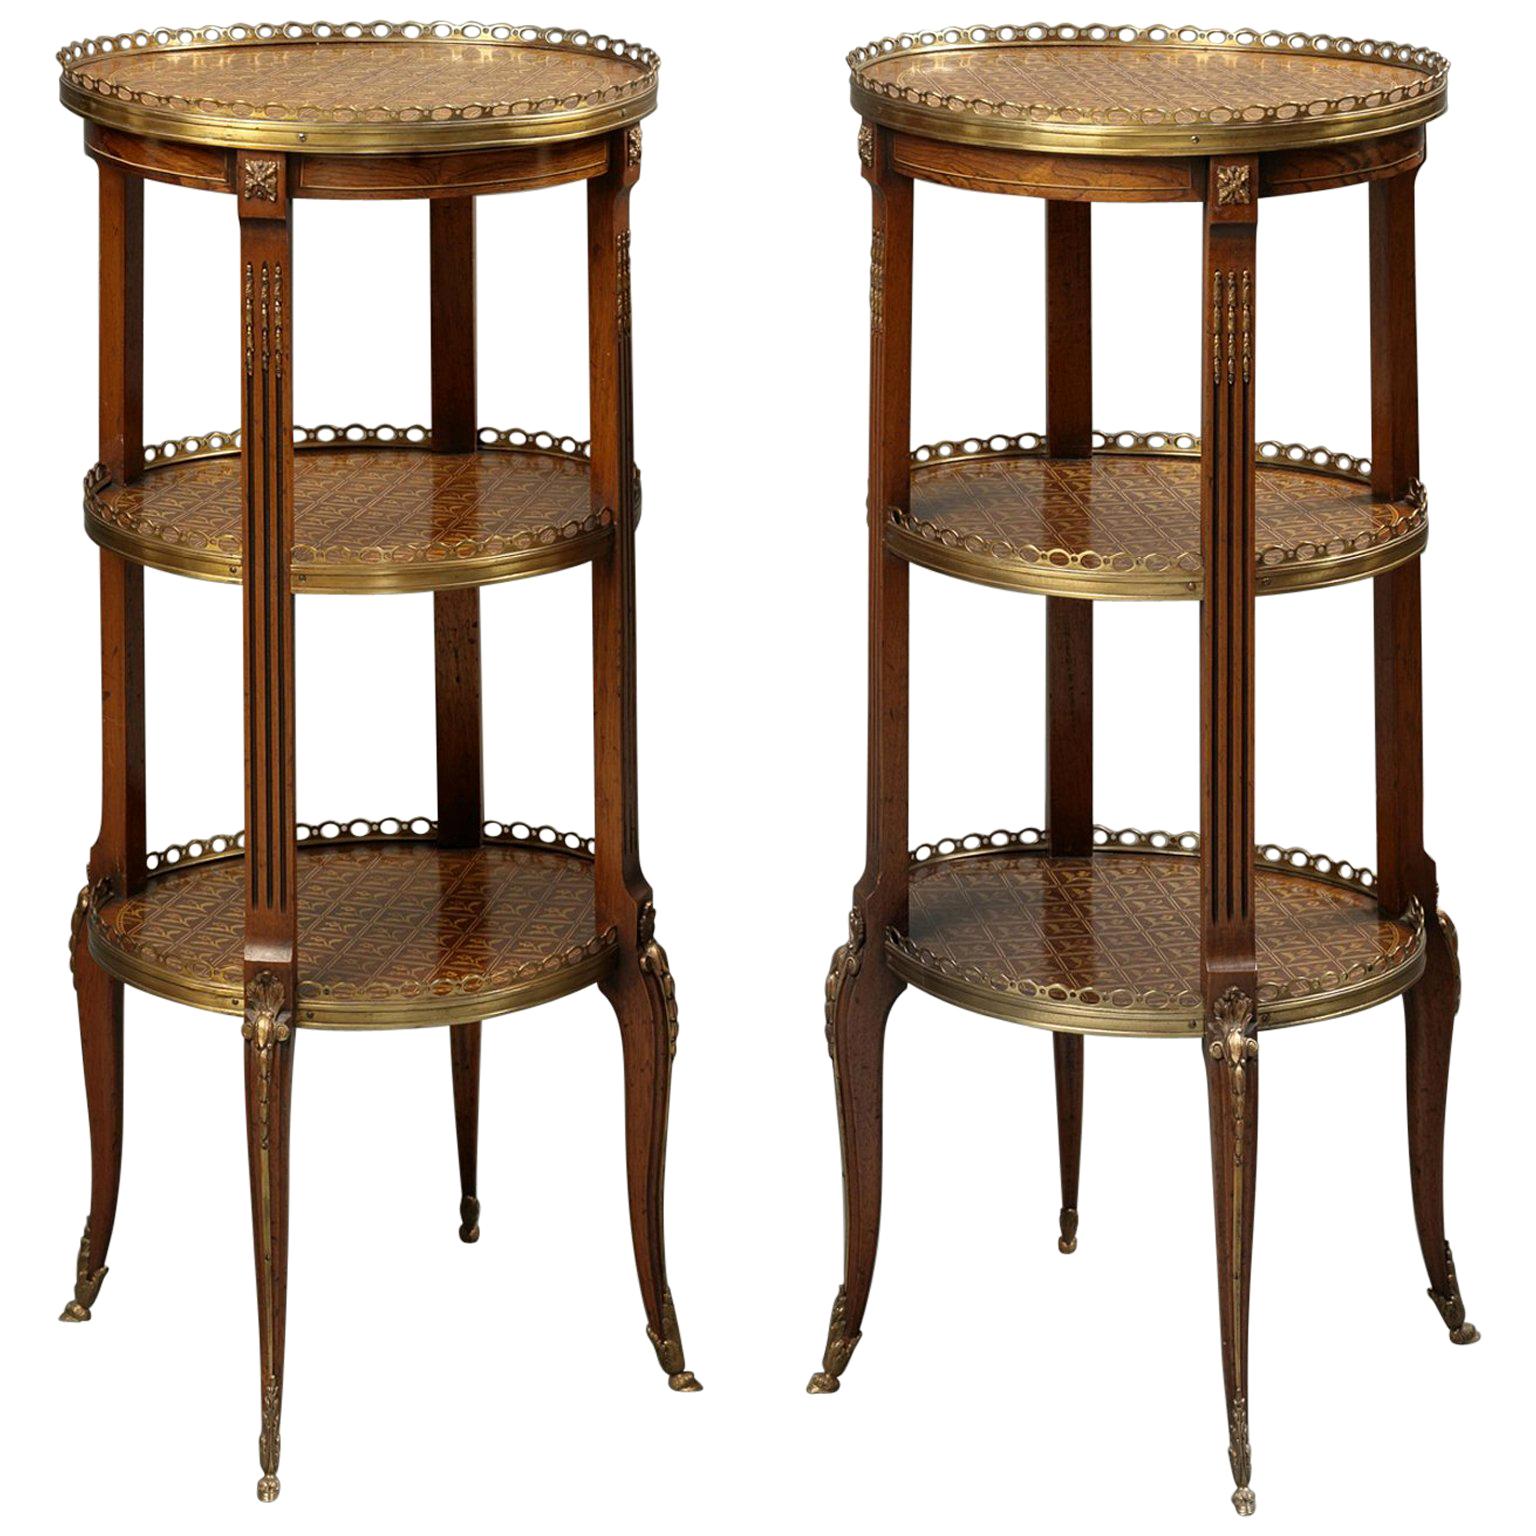 Fine Pair of Marquetry Inlaid Three-Tier Étagère Tables, circa 1890